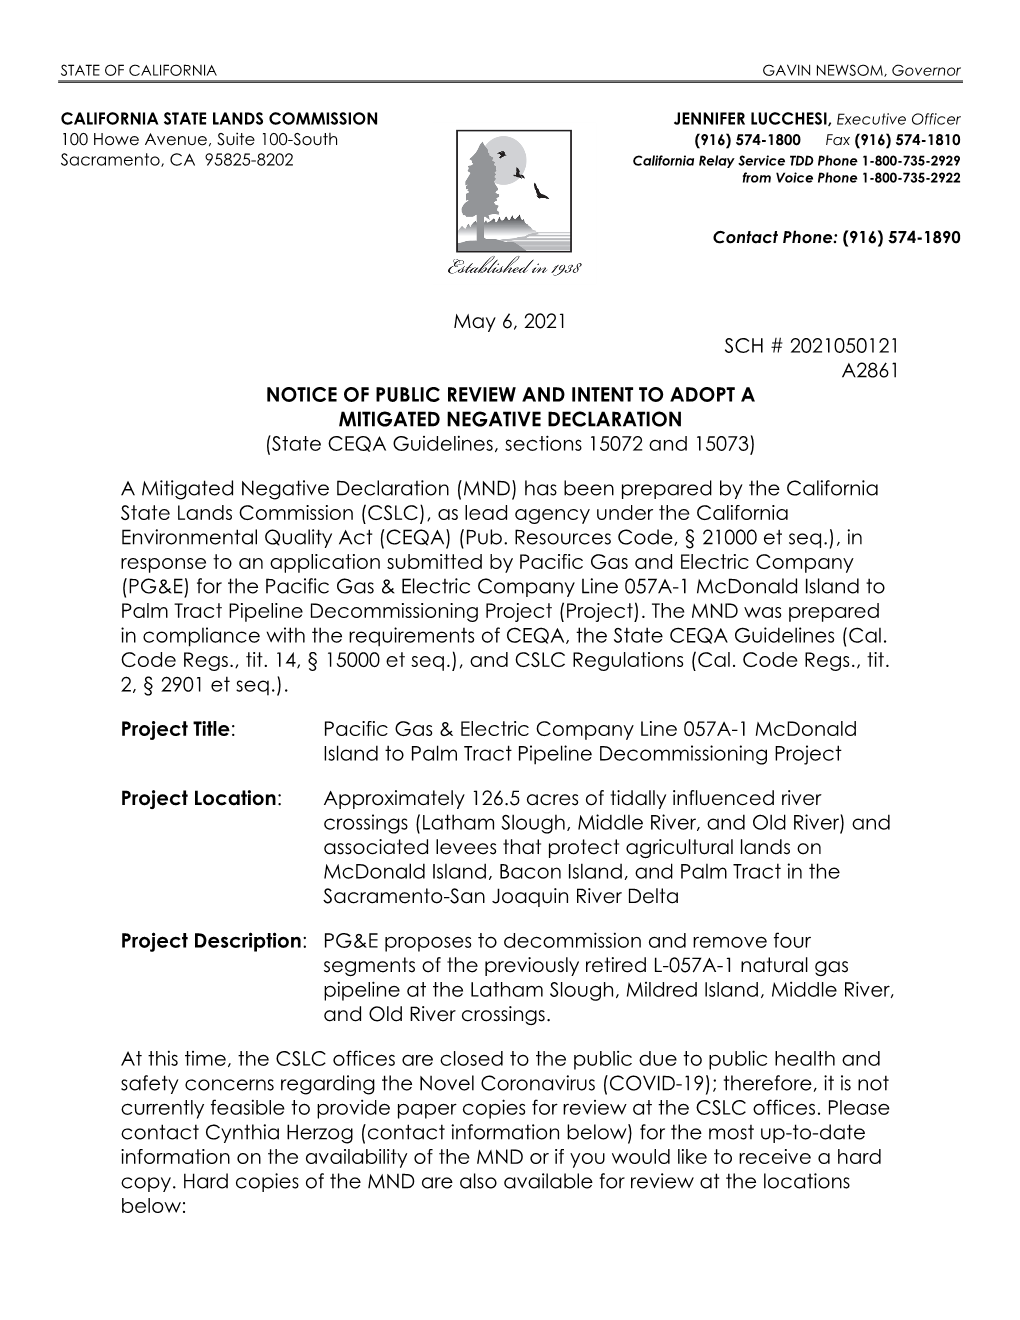 NOTICE of PUBLIC REVIEW and INTENT to ADOPT a MITIGATED NEGATIVE DECLARATION (State CEQA Guidelines, Sections 15072 and 15073)